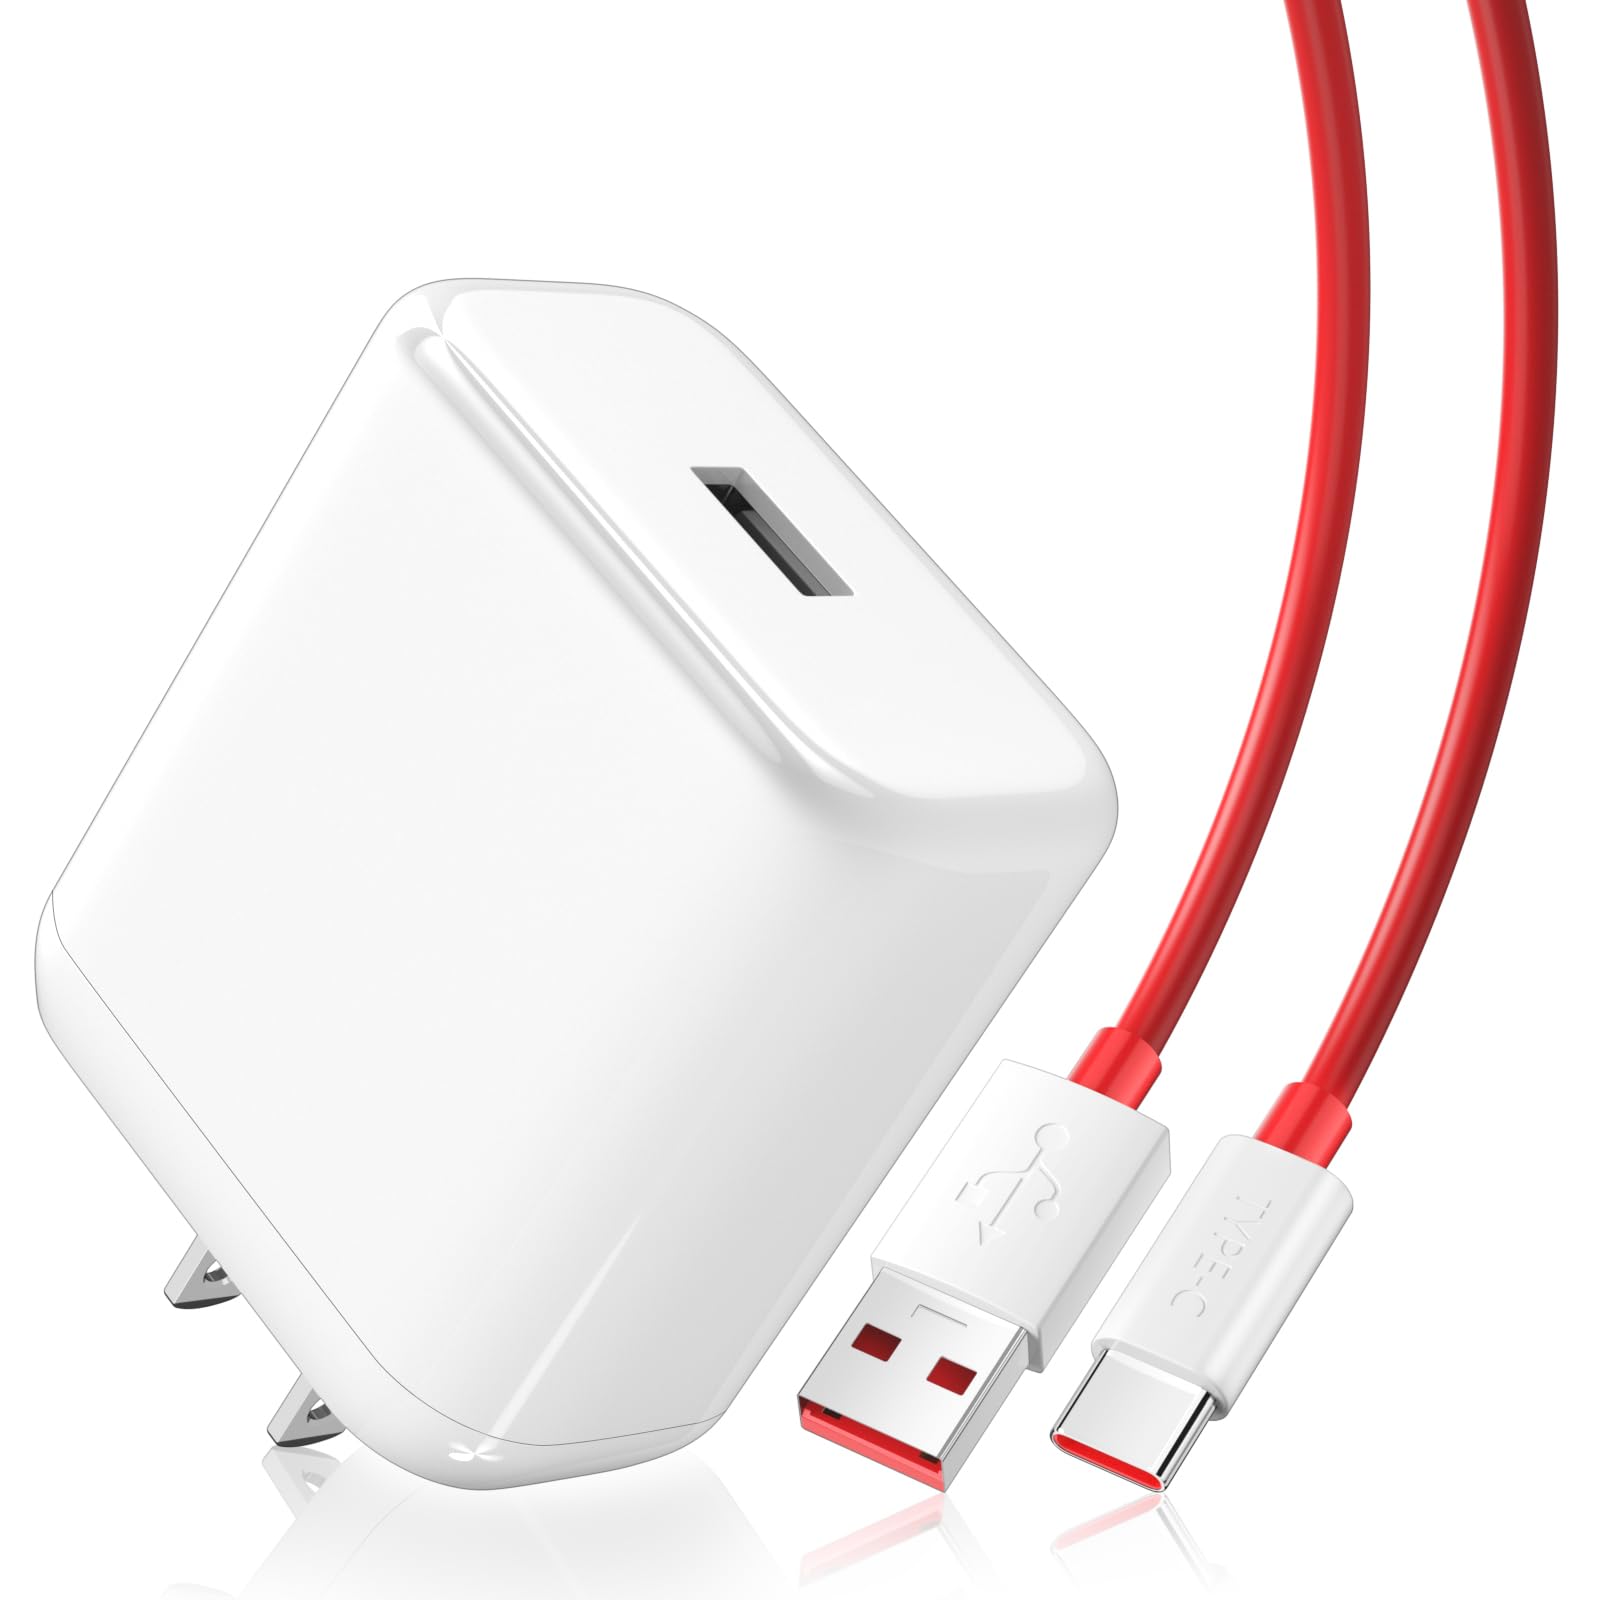 SuperVOOC Warp Charger for OnePlus 11 10 Pro SuperVOOC Warp Charger 65W for OnePlus Pad 10T Nord 9 Pro 8 7T 6 6T 5 5T Buds Pro with 3.3FT USB C Cable